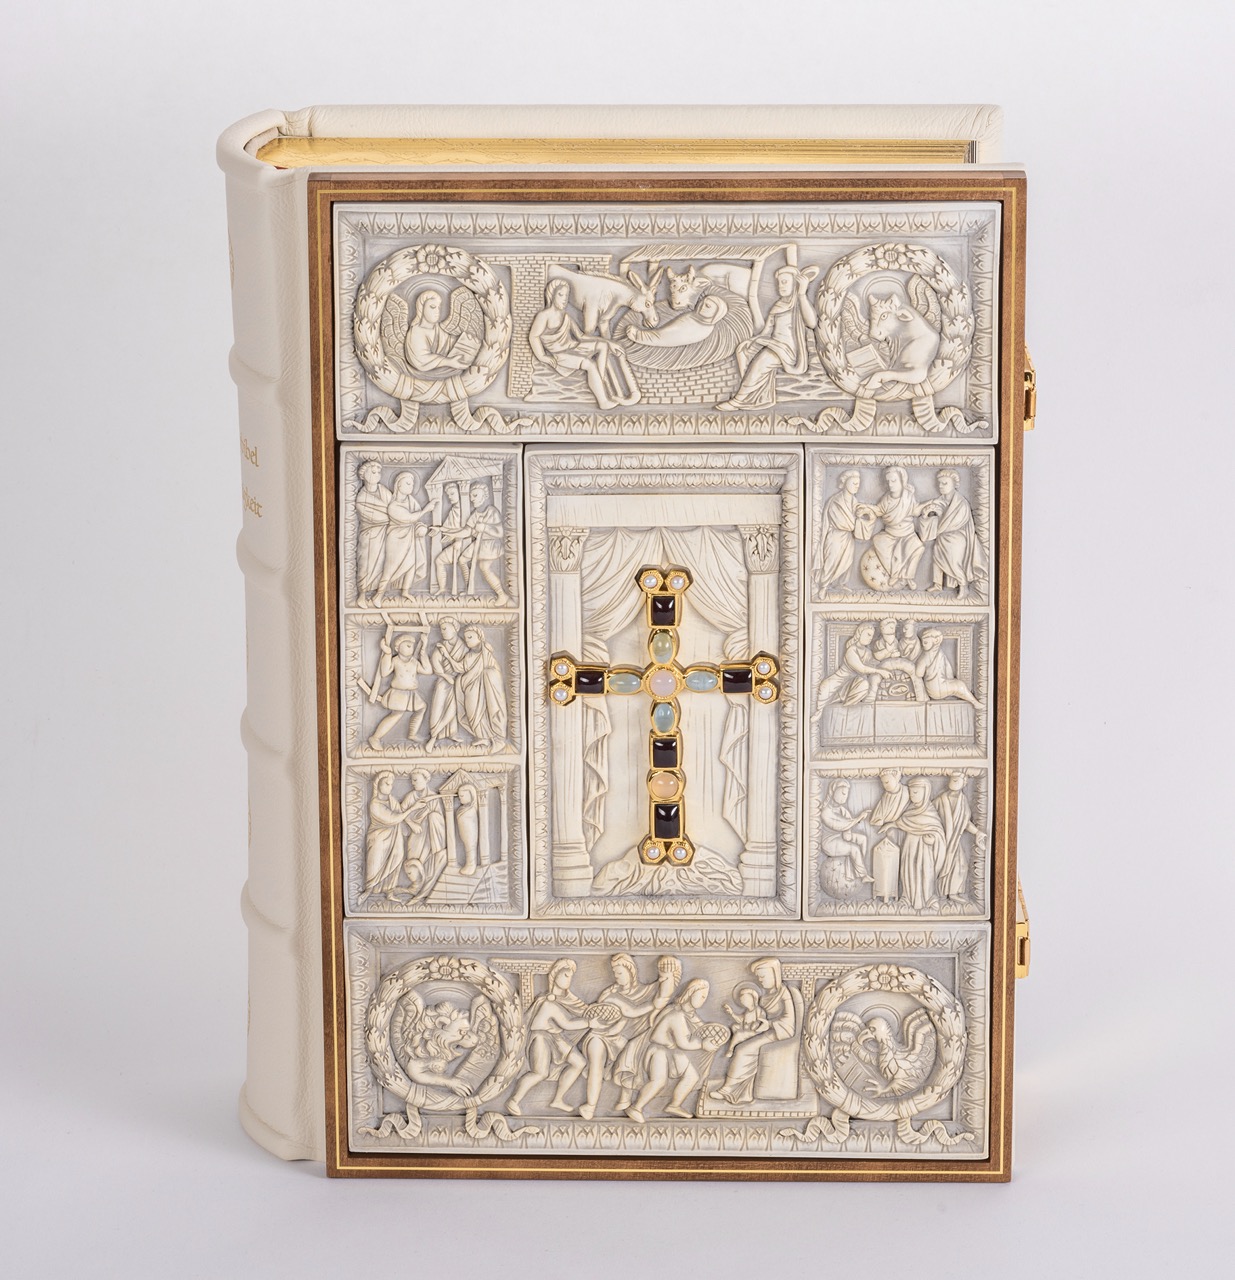 Bible front cover: binding with ivory replicas in a fine wooden frame. In the centre of the cover you can see a magnificent gold-plated cross set with precious stones.